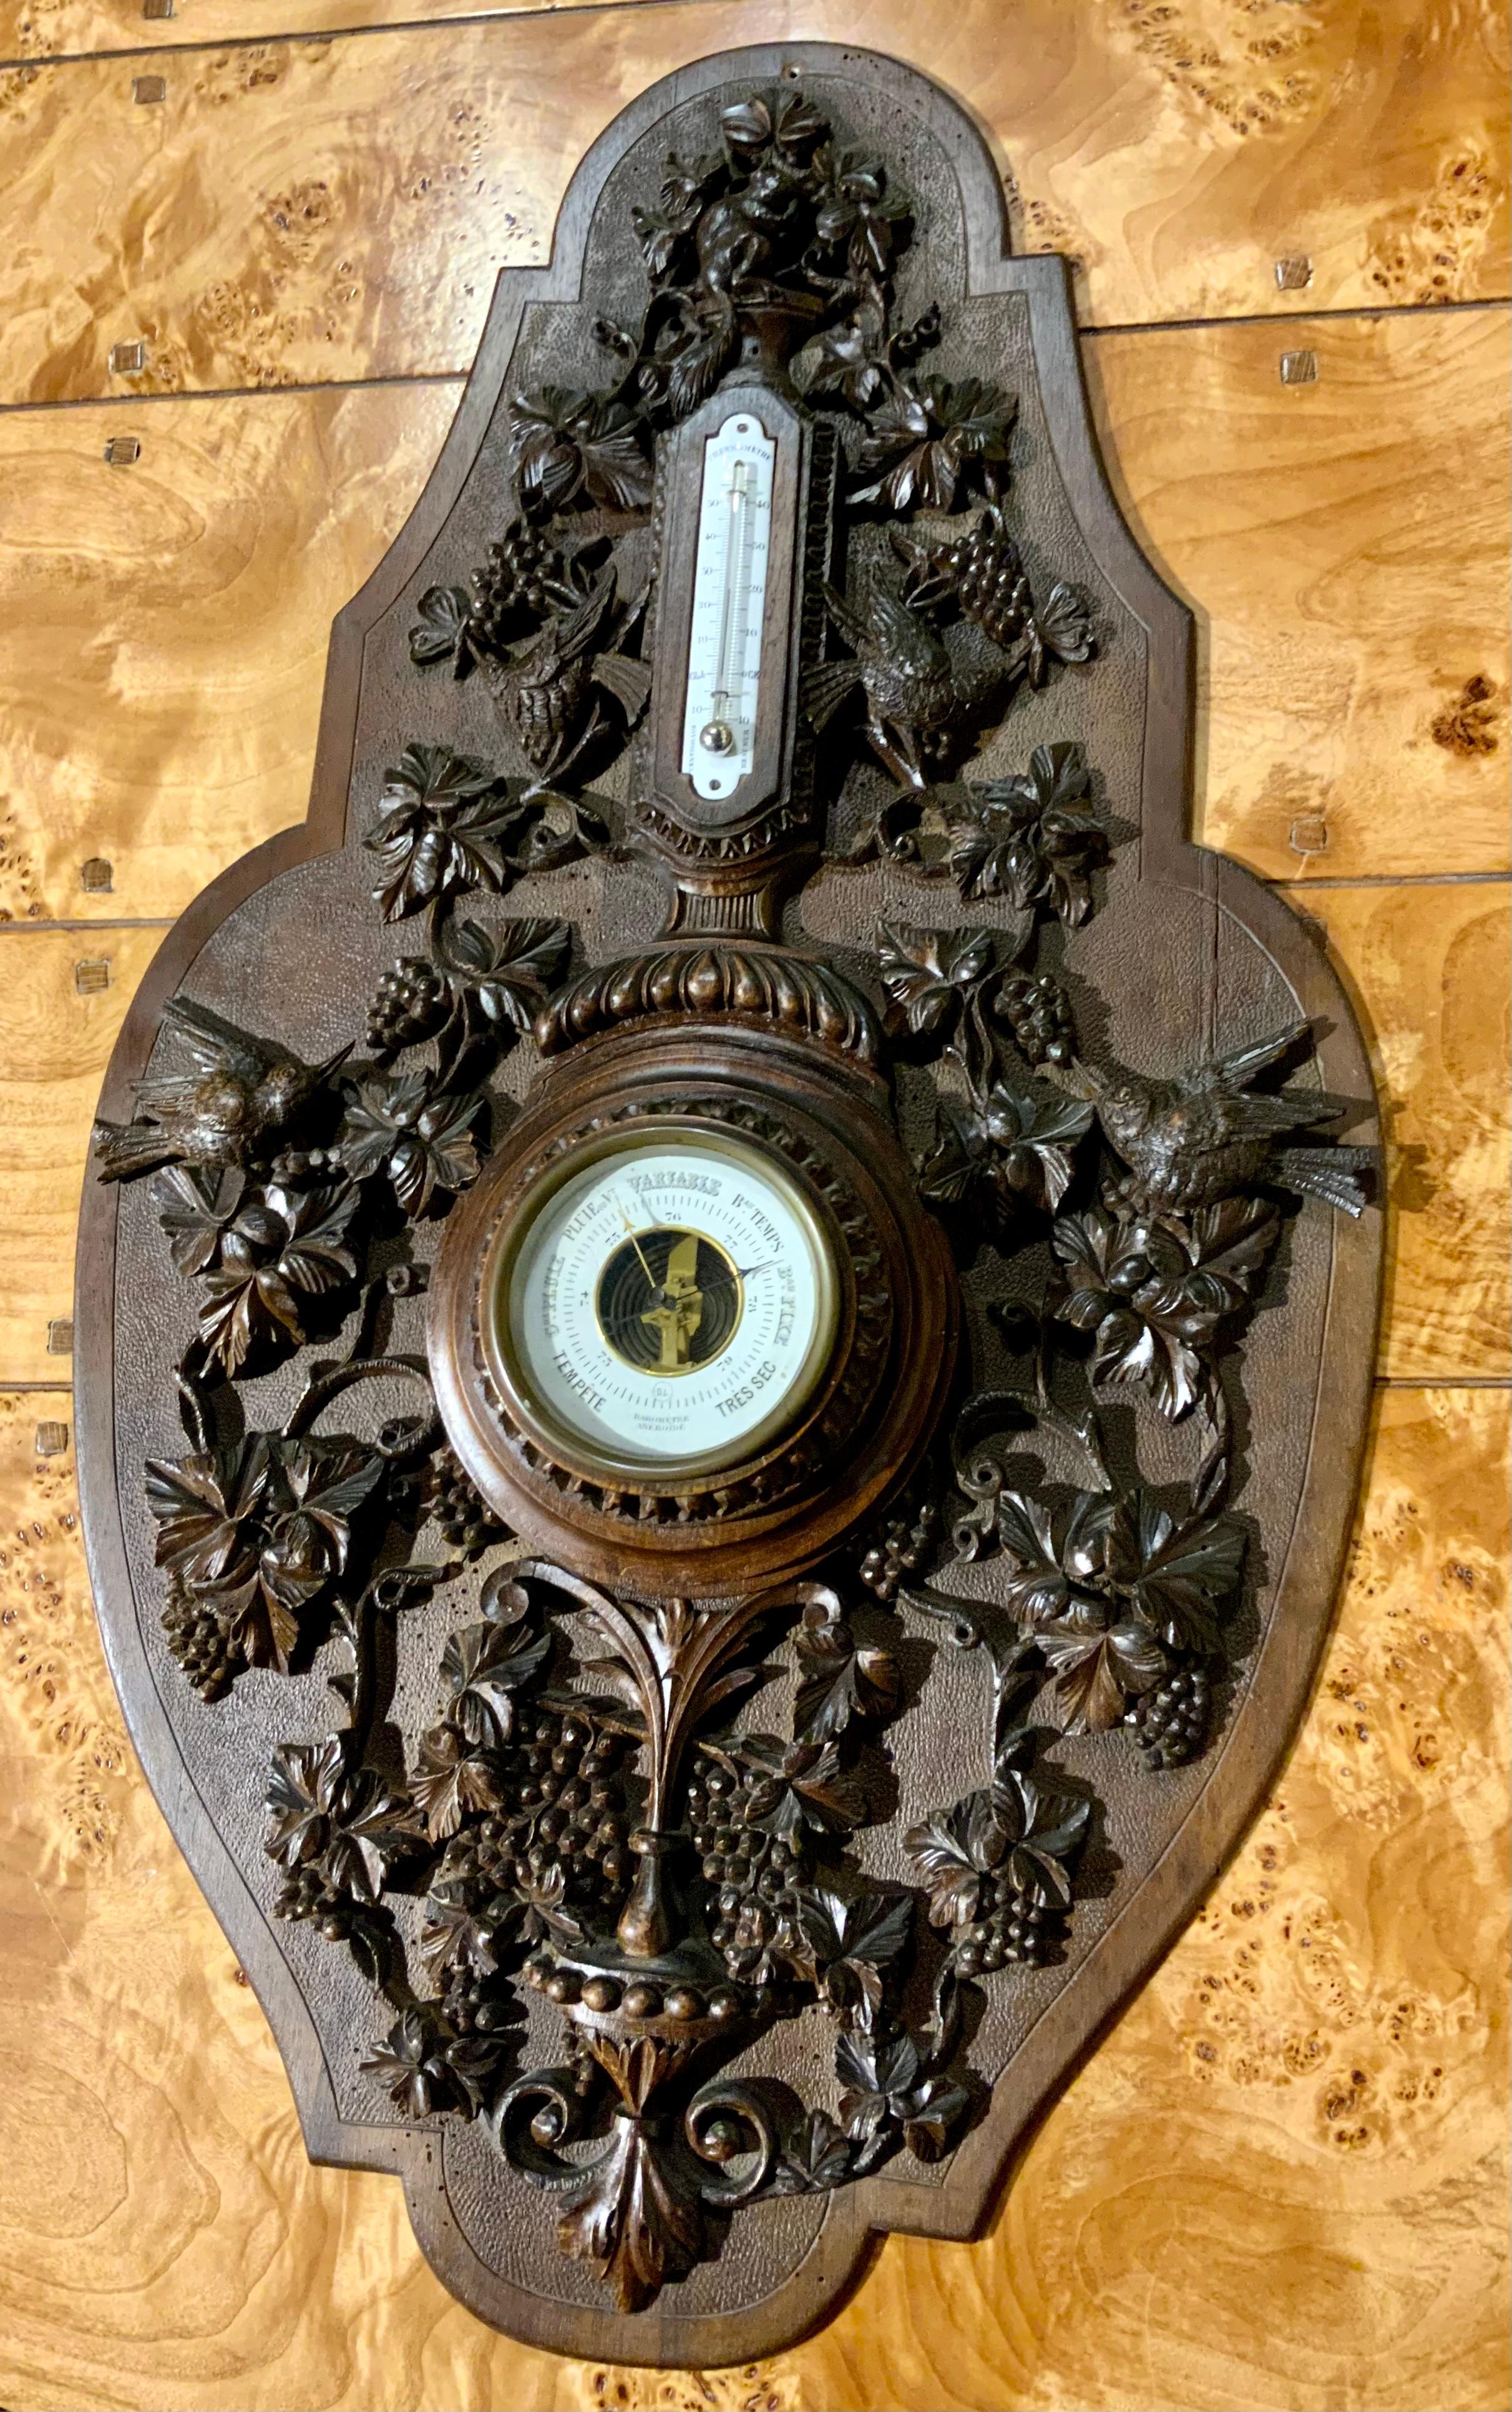 This barometer is in very good condition without structural problems
It is well carved with hummingbirds and grapes as a decorative motif.
The barometer is original and it is in working order. The shape is unique
In a elongated oval shape.